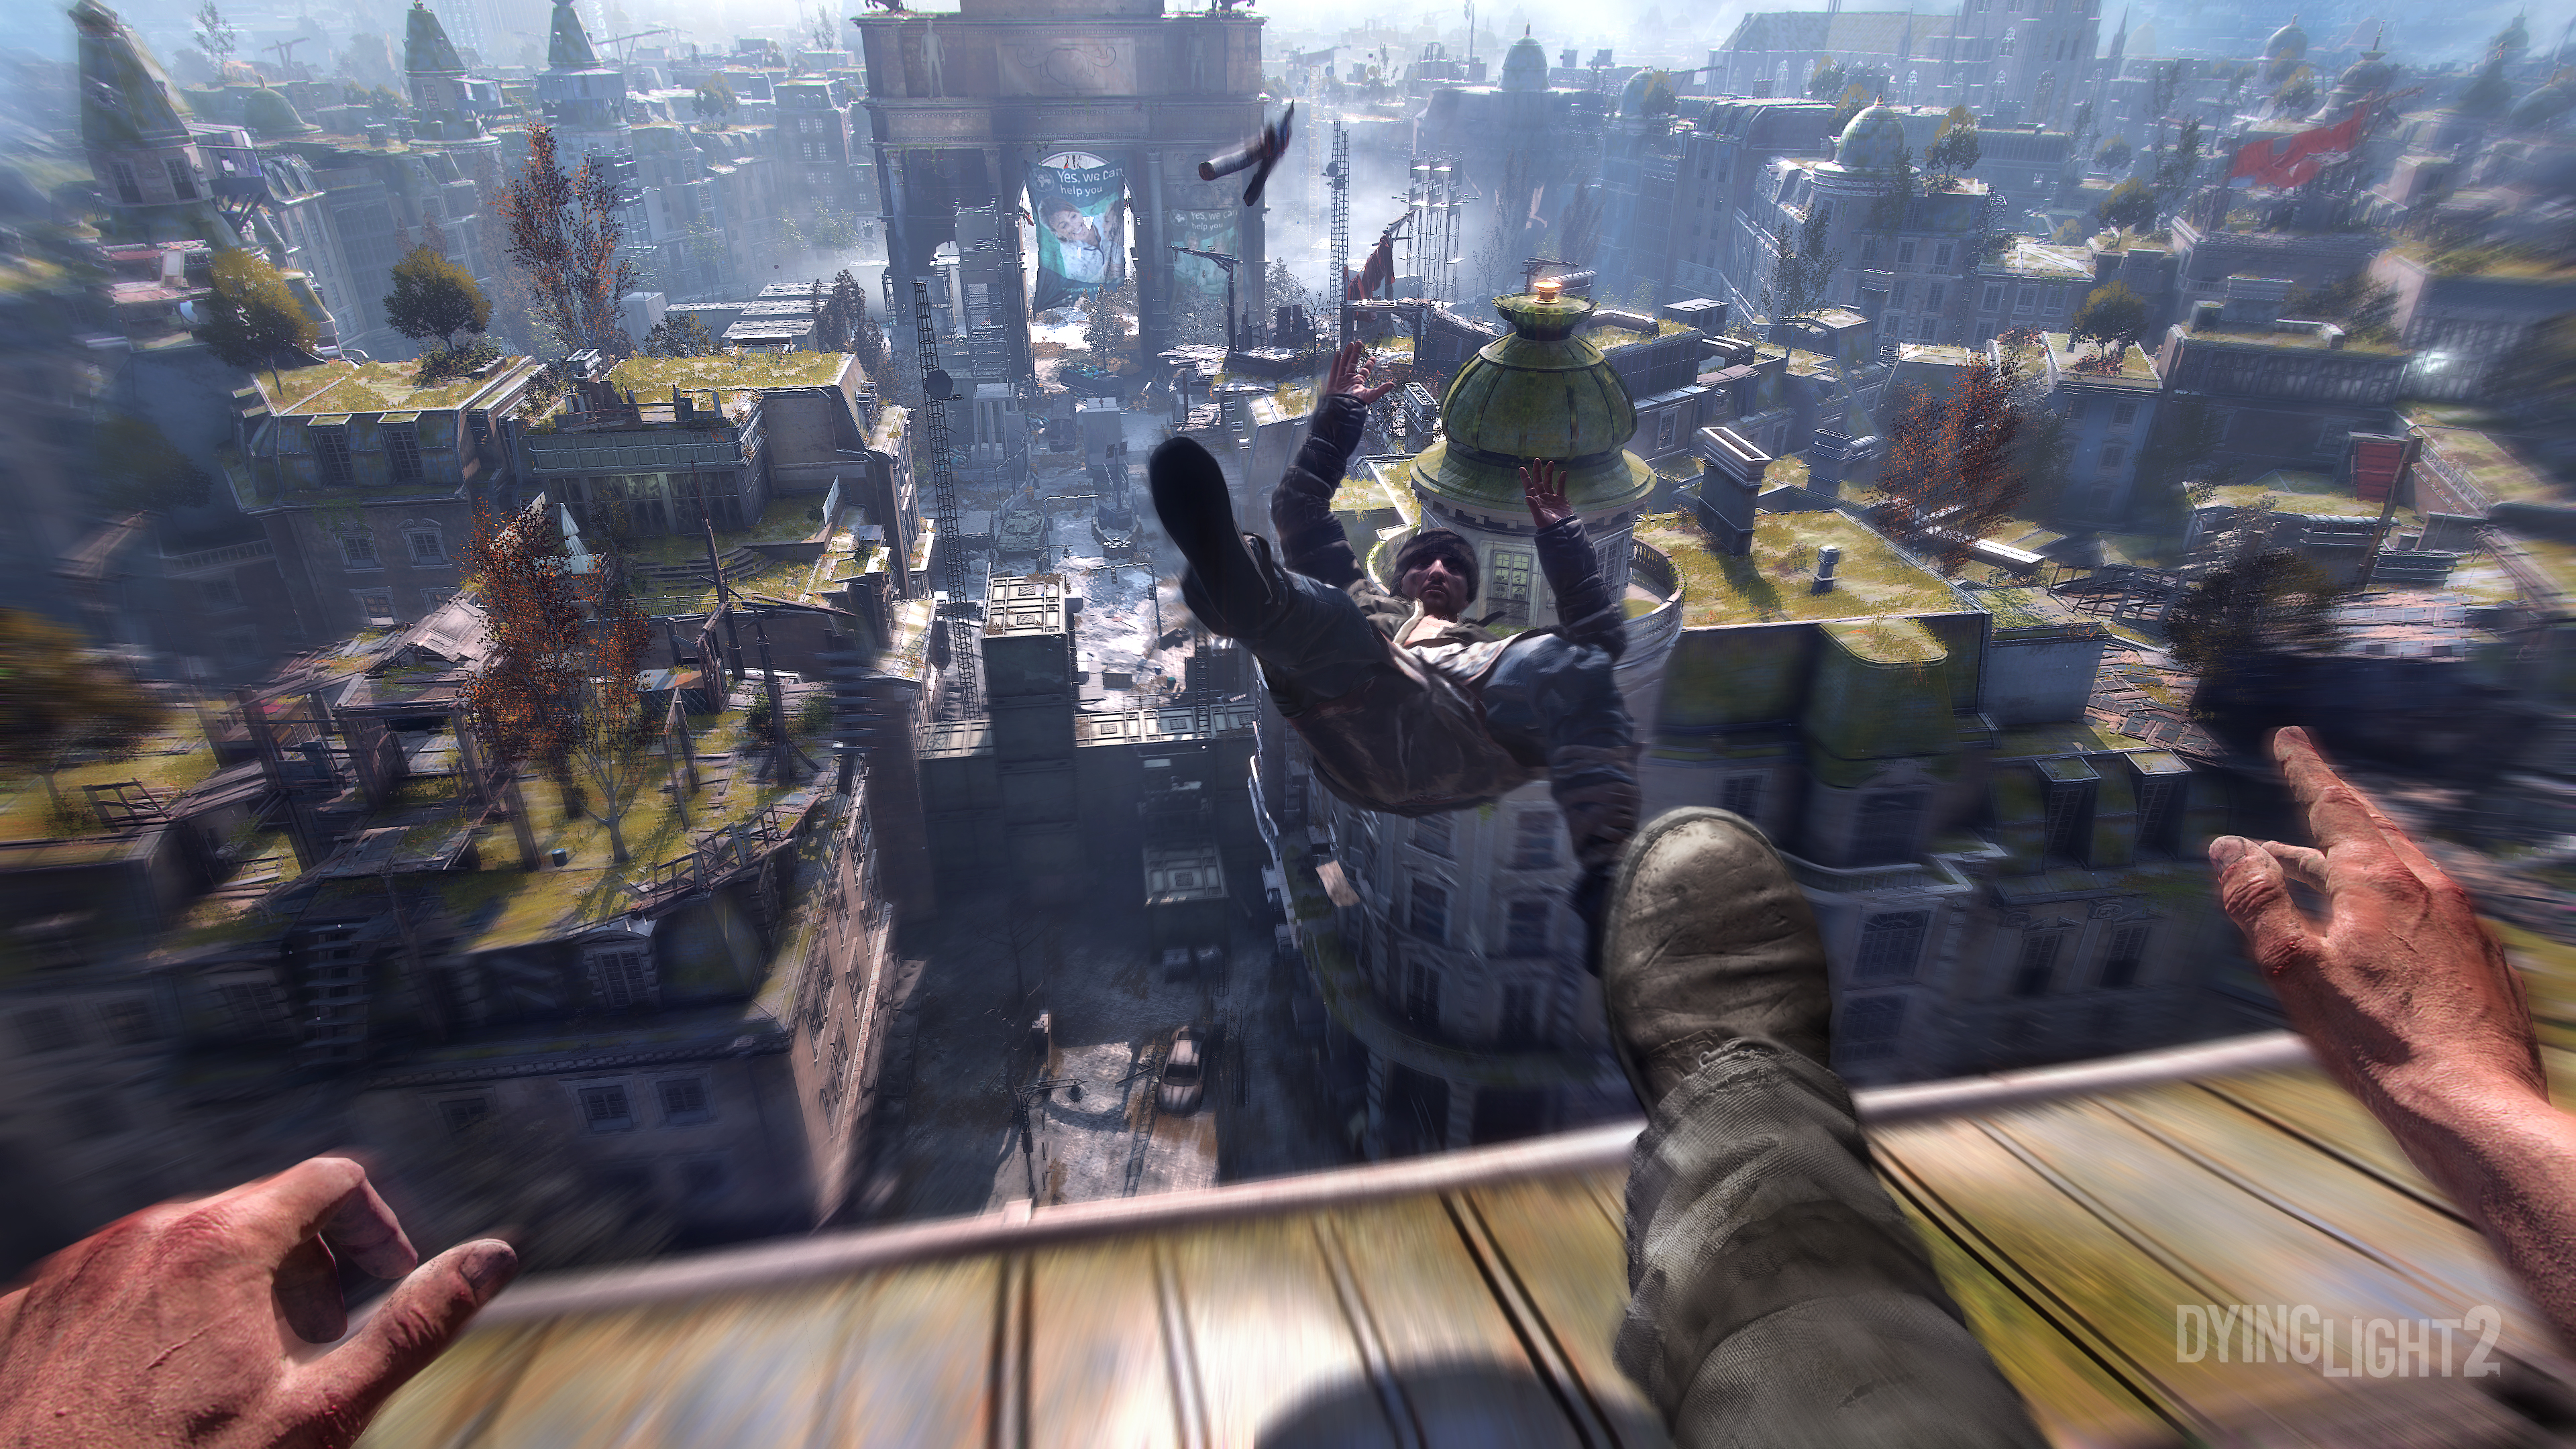 dying light 2 pc download free